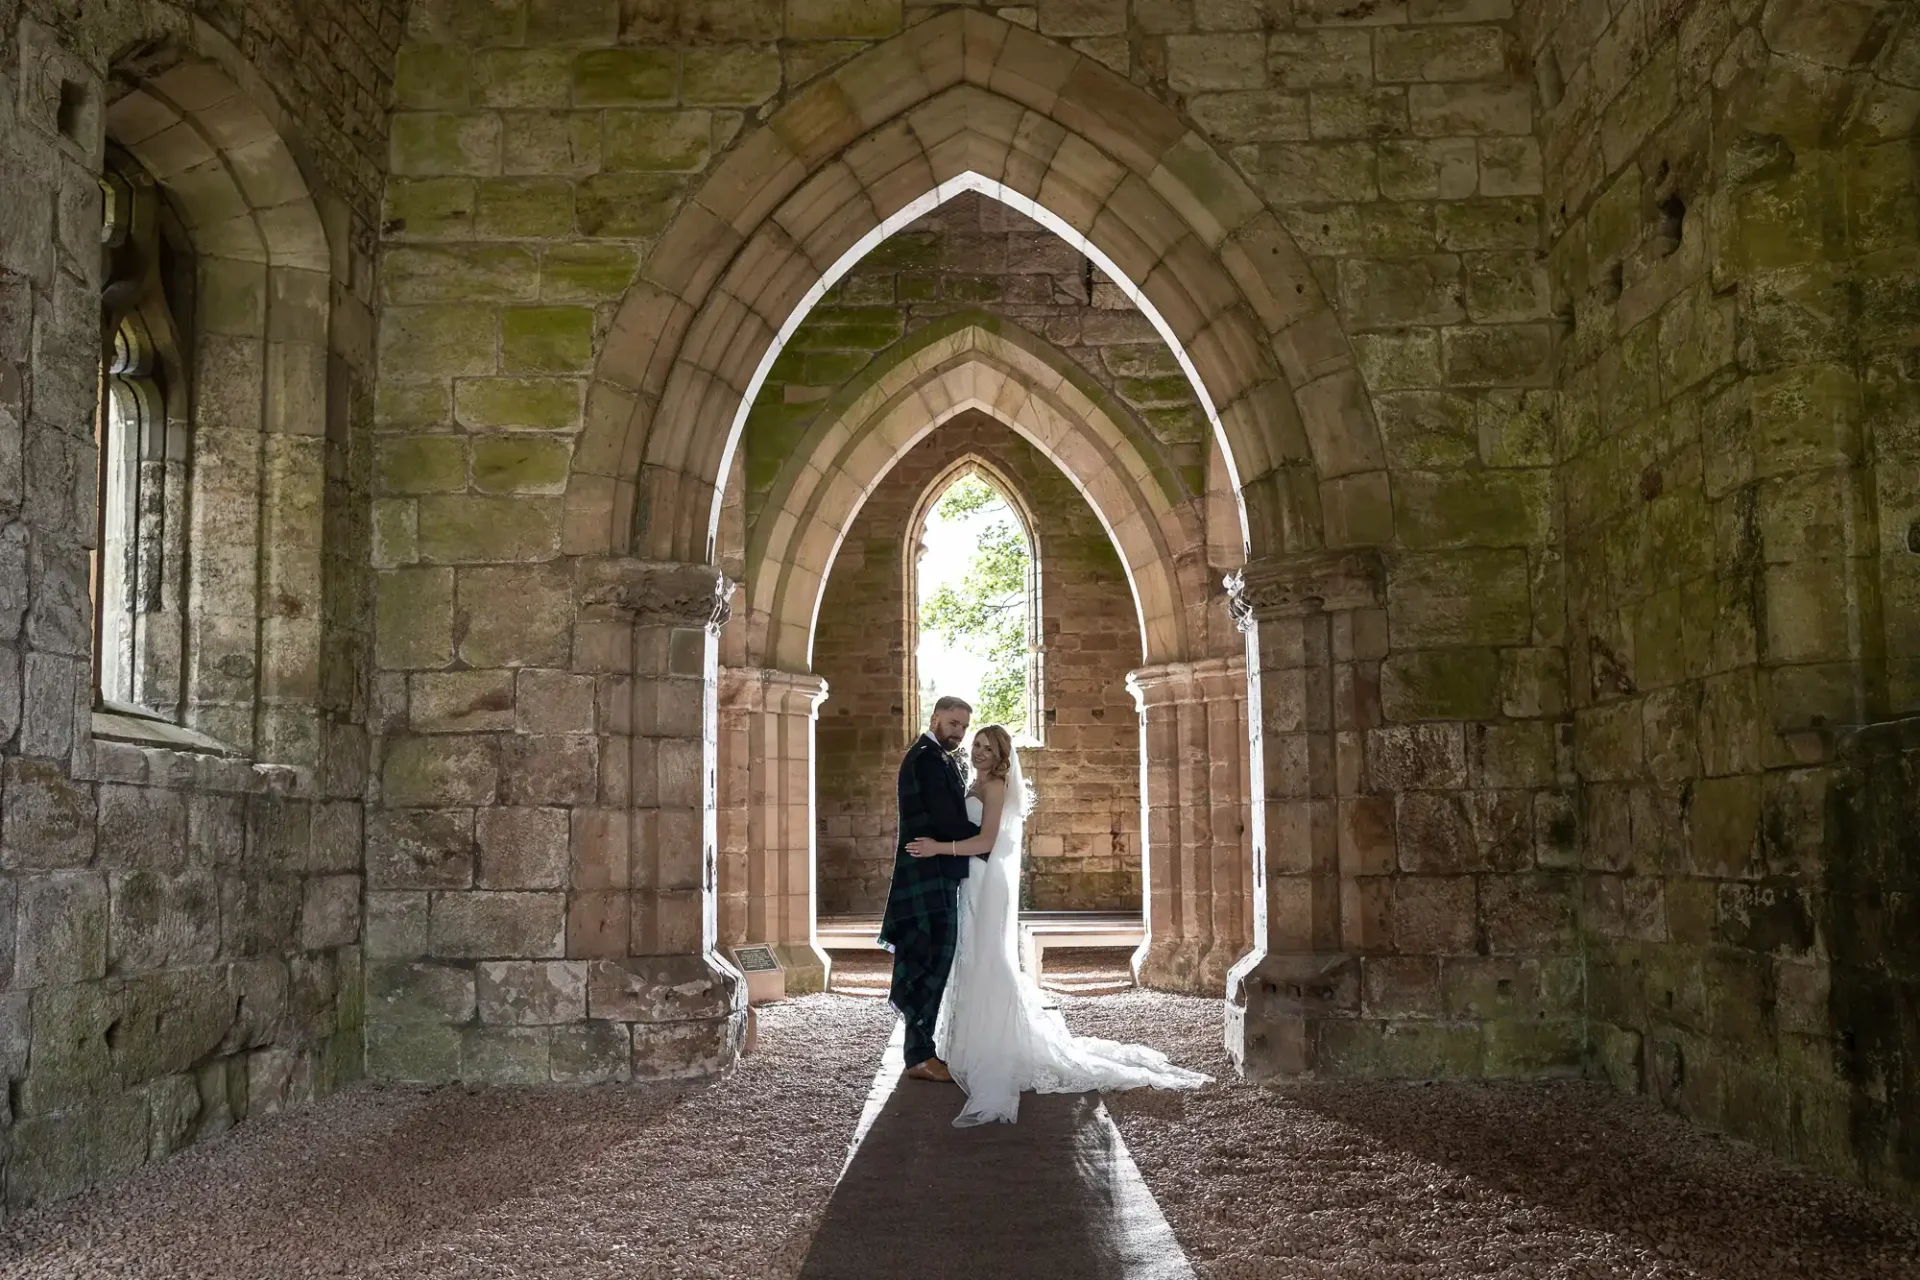 A couple embraces under the arches of an ancient stone ruin, with sunlight filtering through the windows.